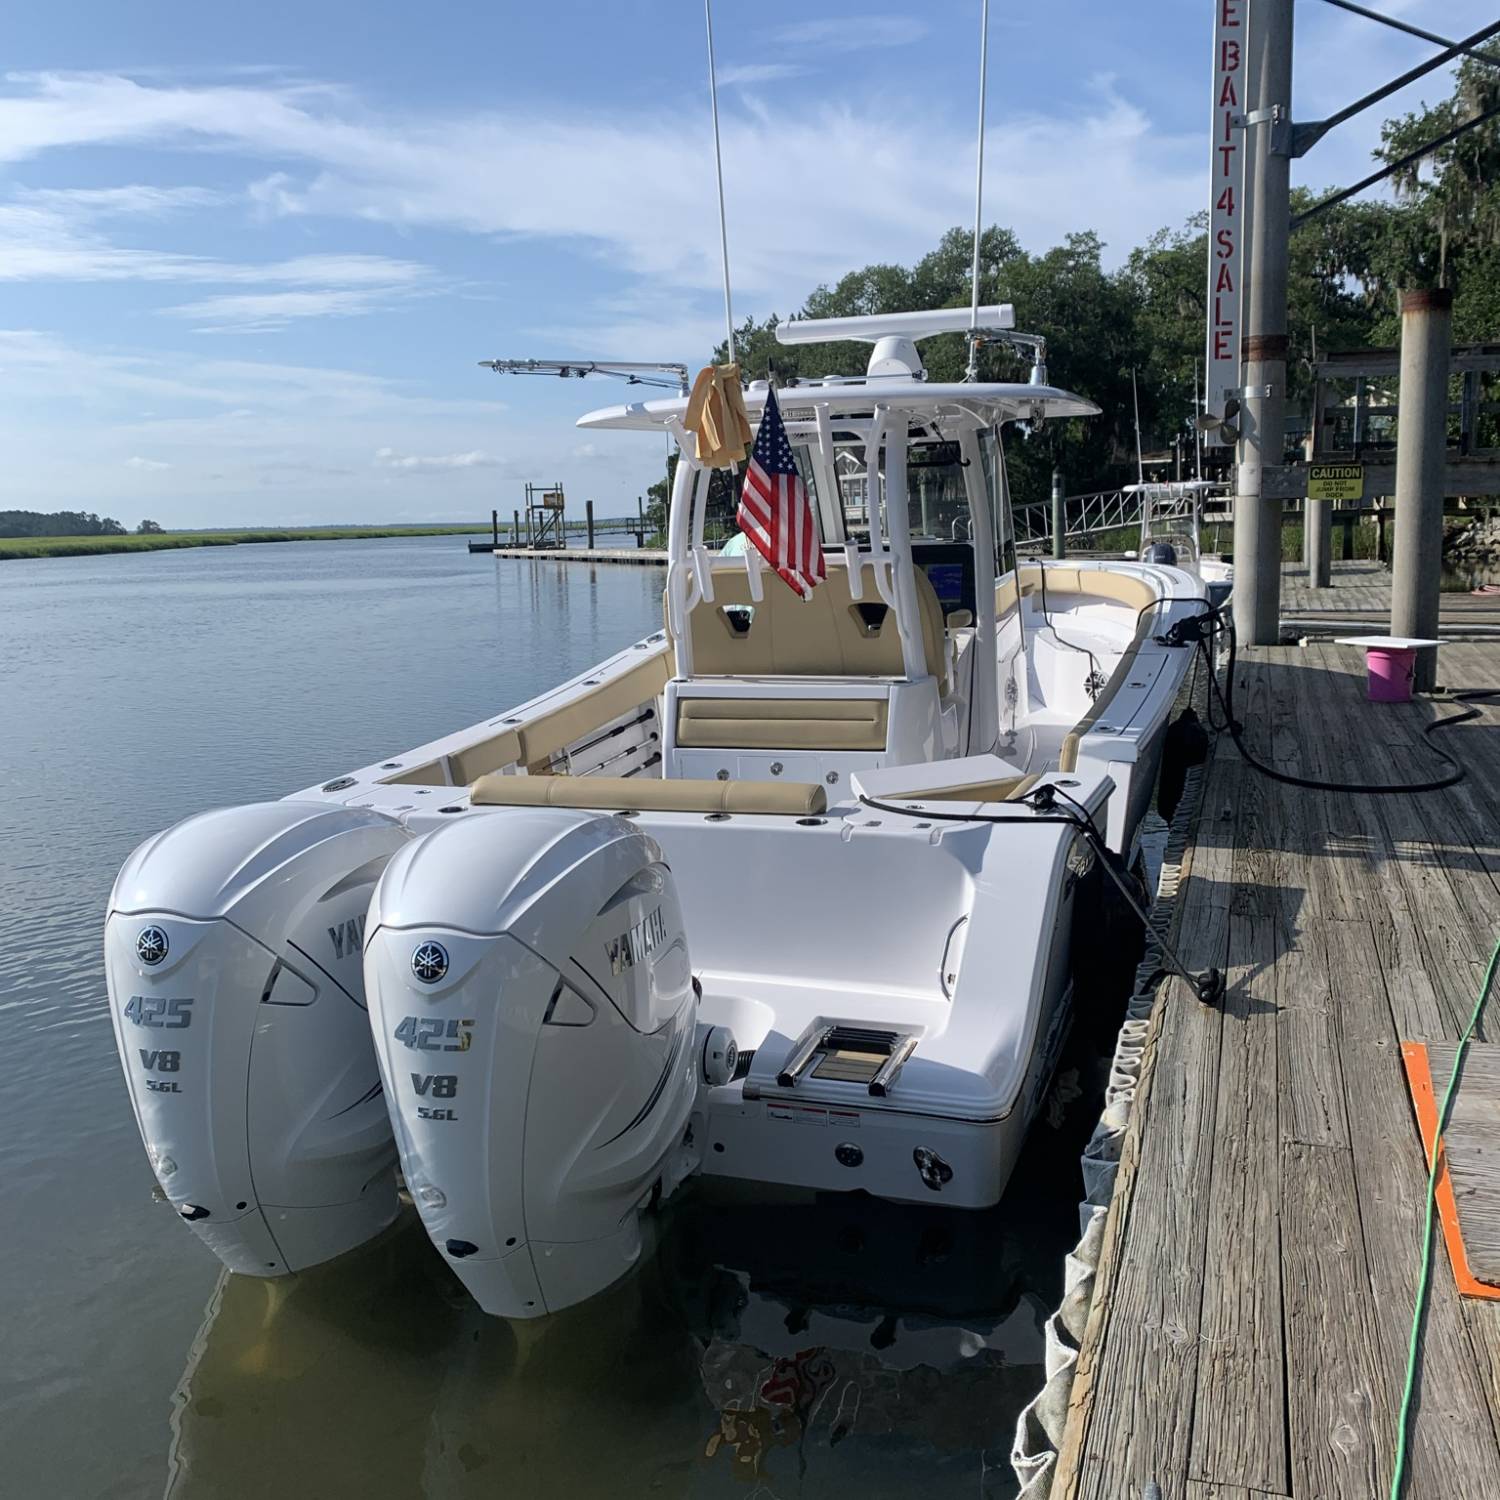 Title: 322 Open - On board their Sportsman Open 322 Center Console - Location: Shellmans Bluff, Ga. Participating in the Photo Contest #SportsmanMay